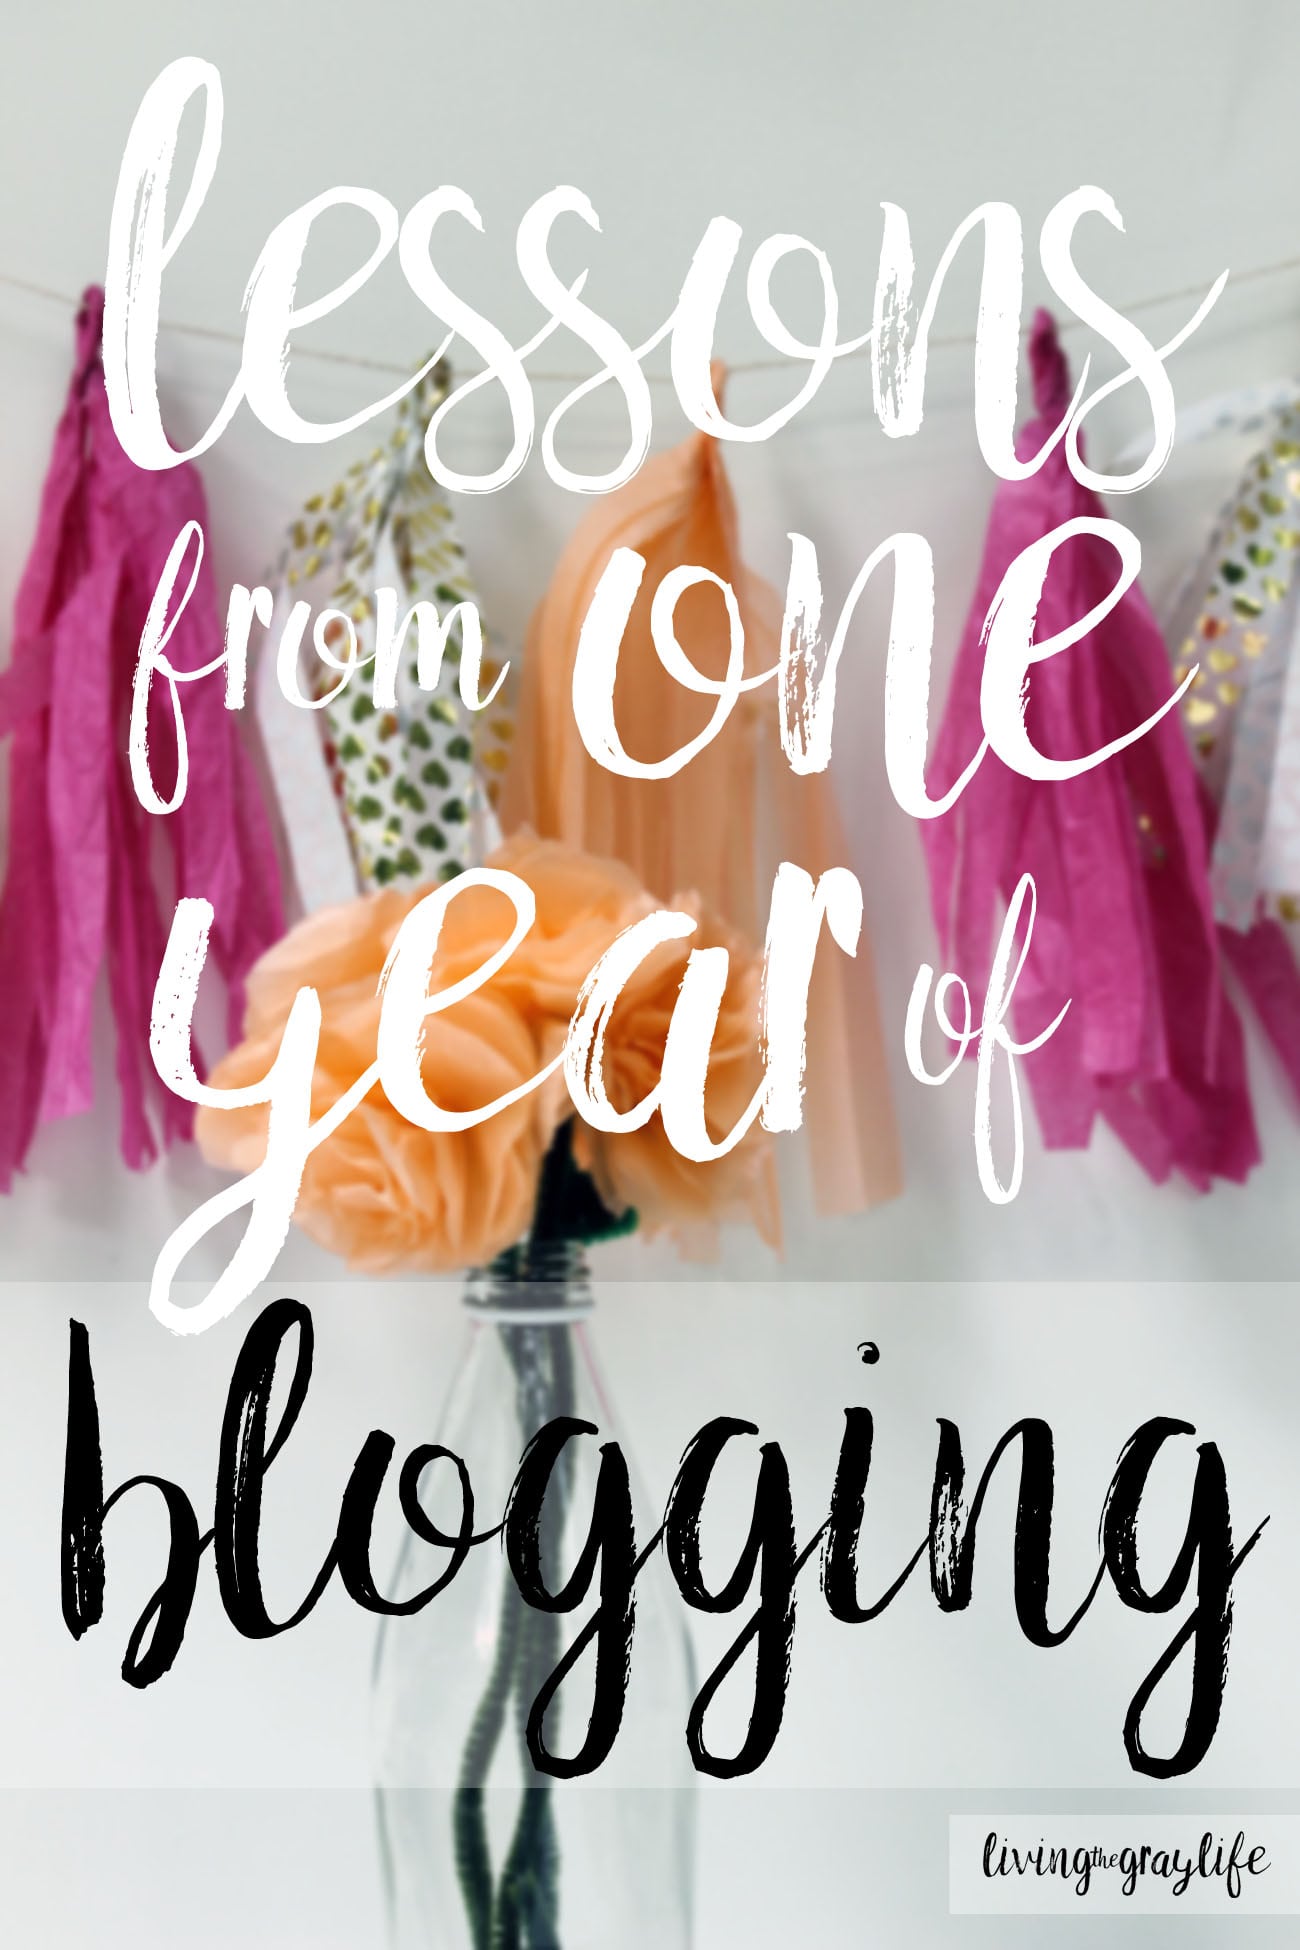 Lessons learned after one full year of blogging lessons from one year blogging